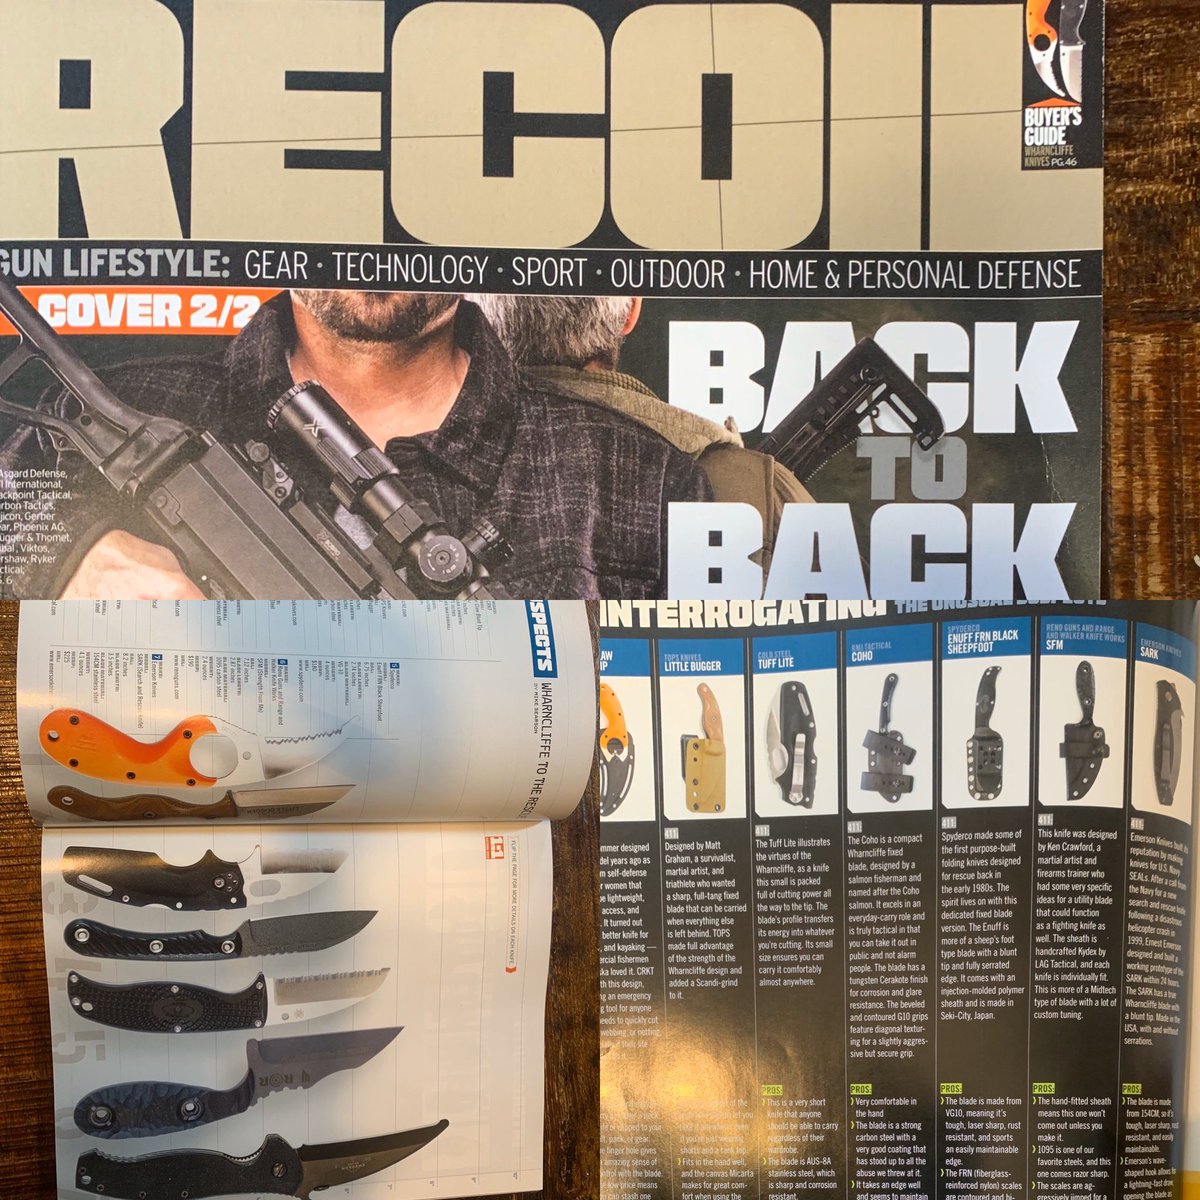 Thank you @mikesearson for including the #SFM in the @RecoilMag #SHOTShow edition!  Honored to be among the other awesome blades!
#crawford #TutumTeRoboreReddam
#StaightToThePoint #RenoGunsAndRange #BattleBorn